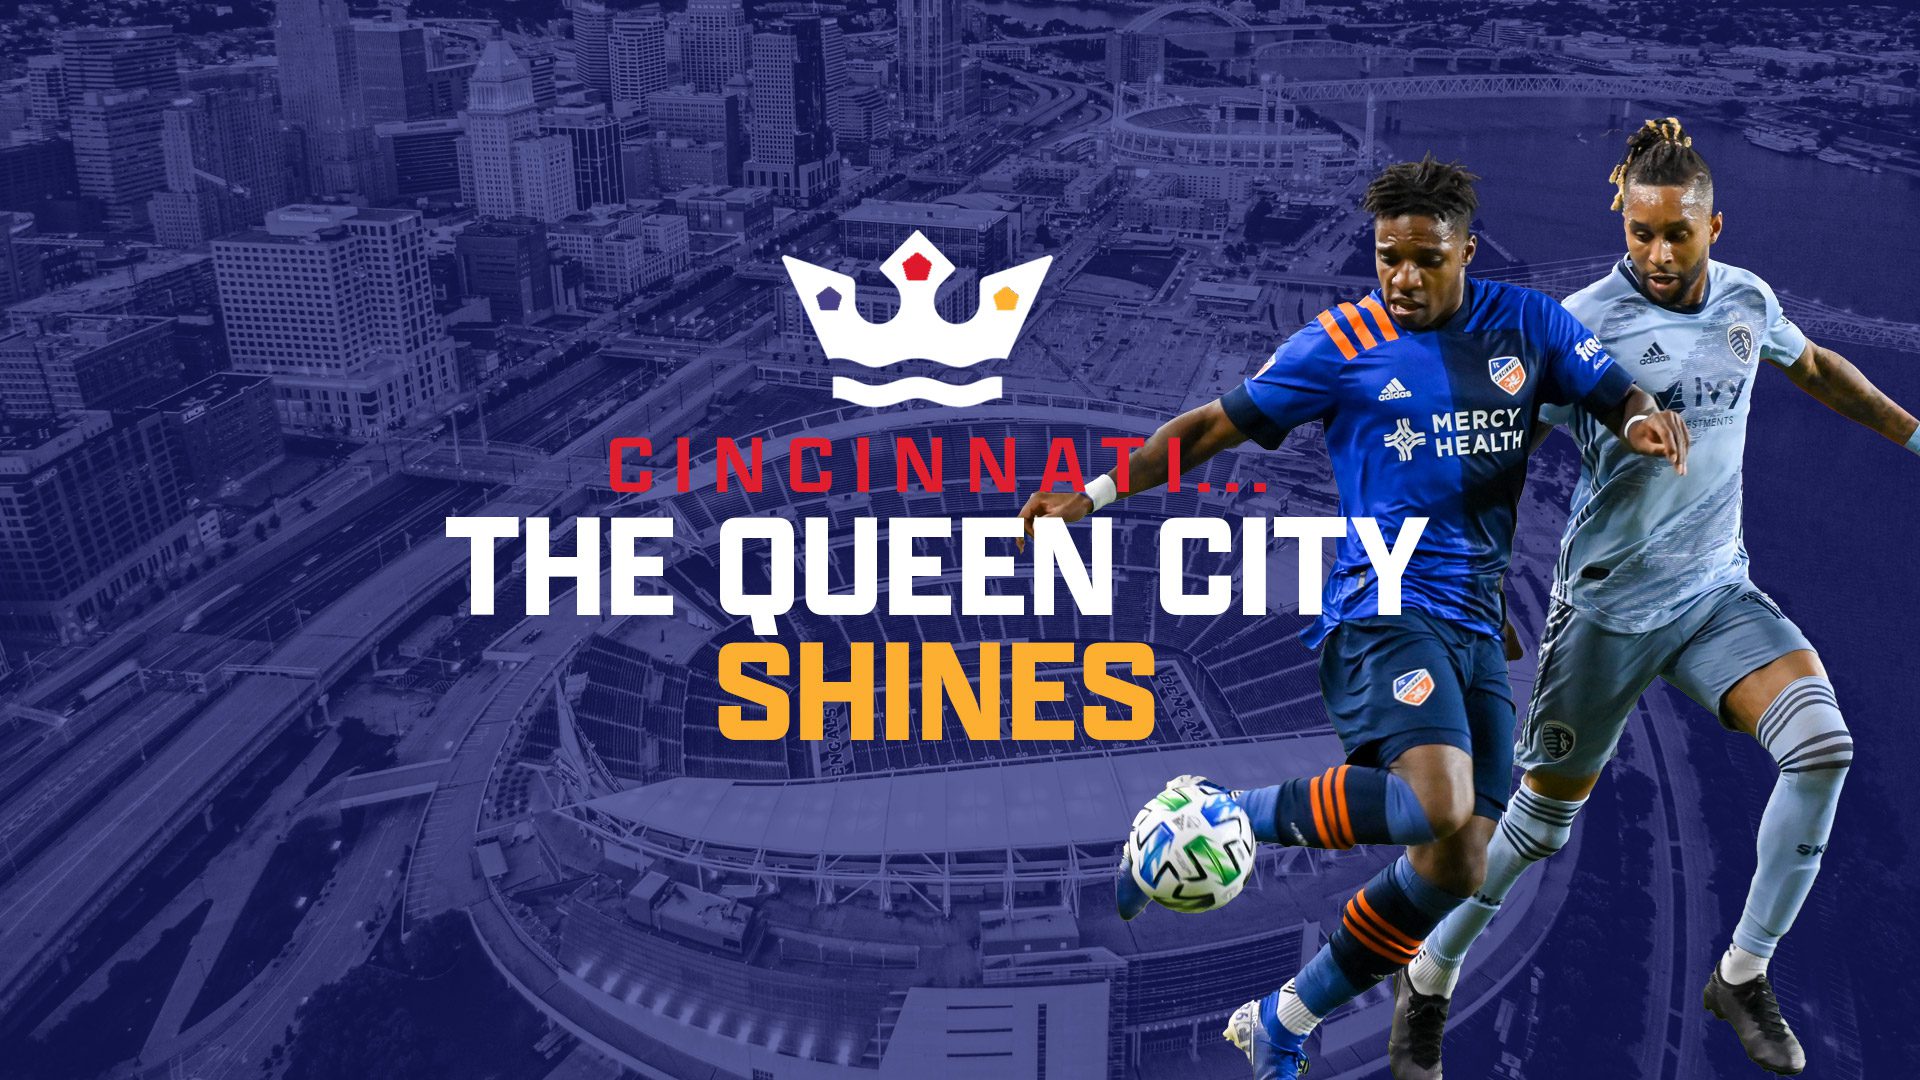 The Queen City Shines